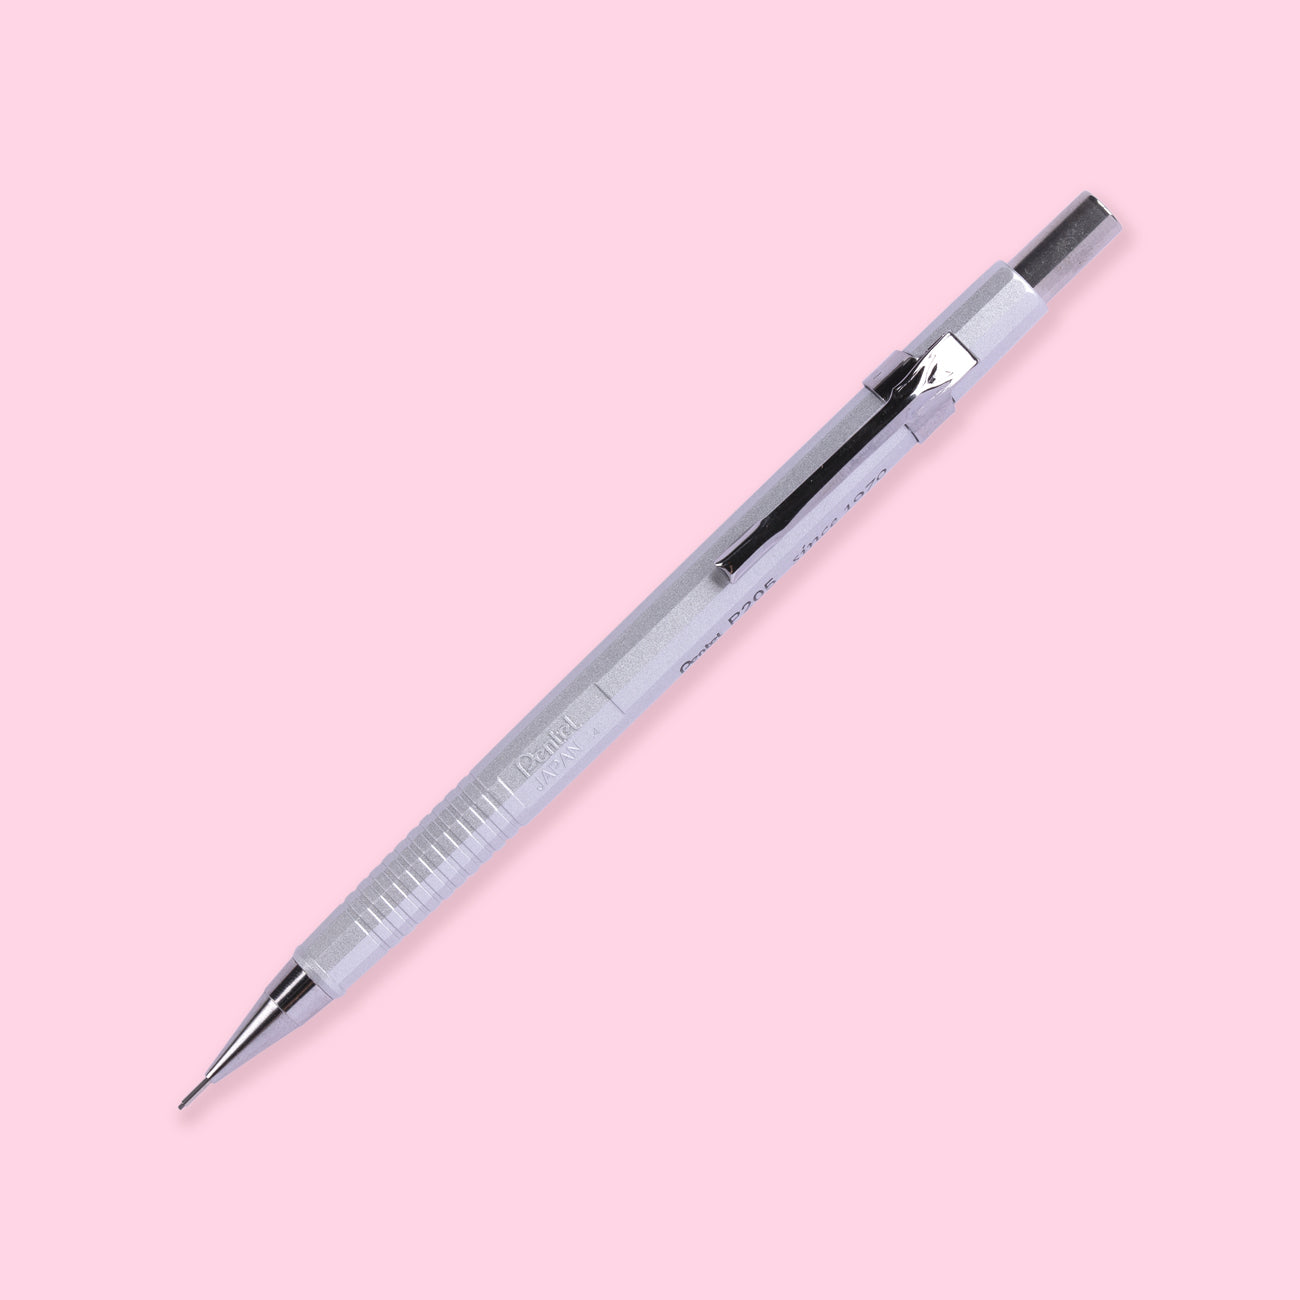 Pentel Limited Edition P205 Mechanical Pencil - 0.5 mm - Silver